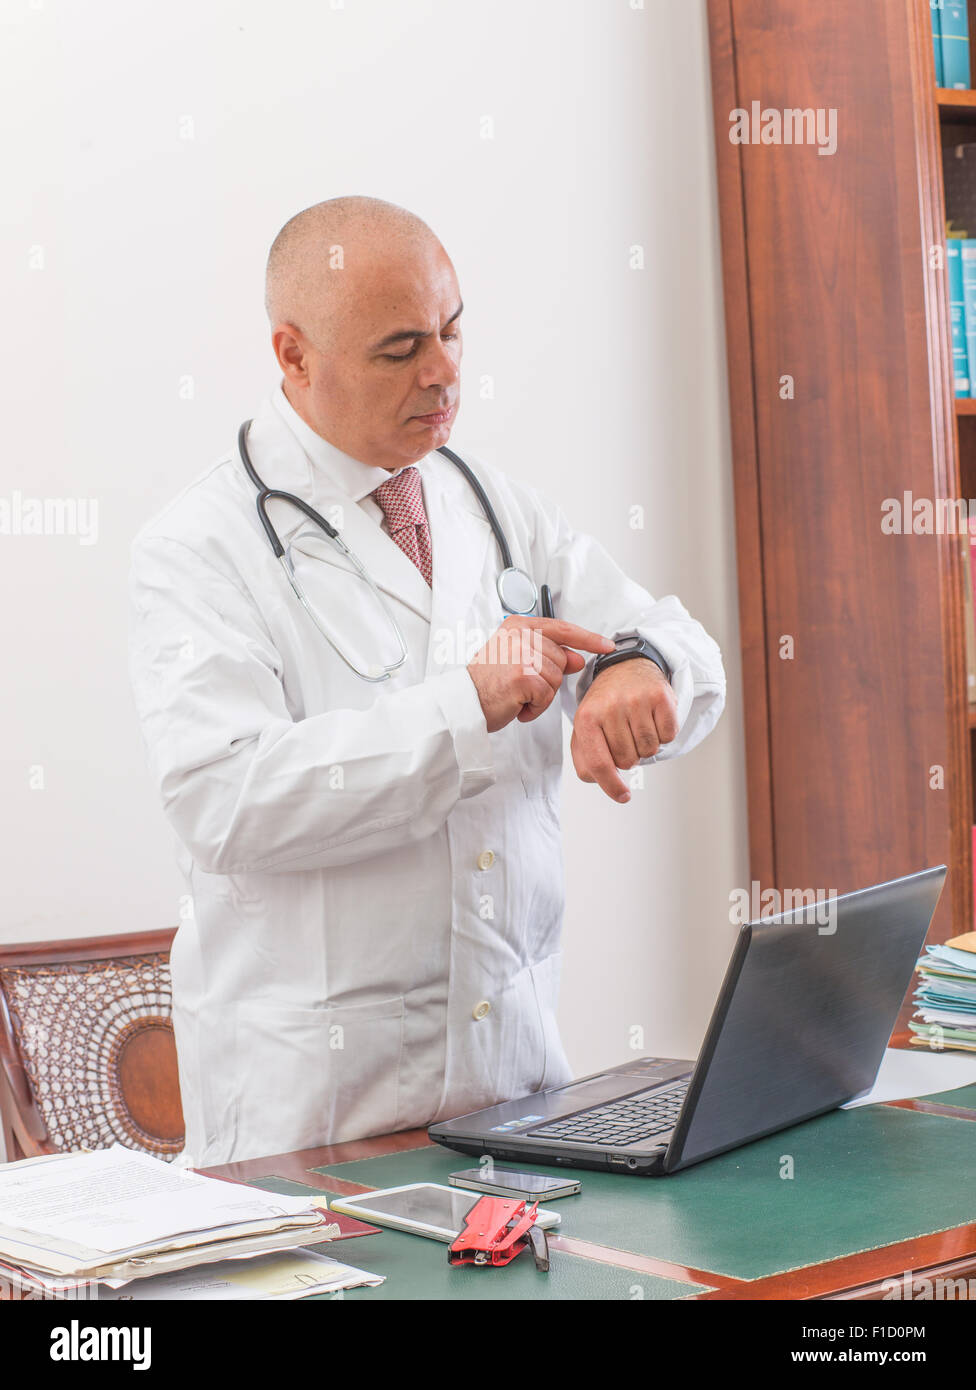 Aback doctor in his studio, uses a smartwacth front of his laptop. Use new technologies. In his professional studio, he is sitti Stock Photo